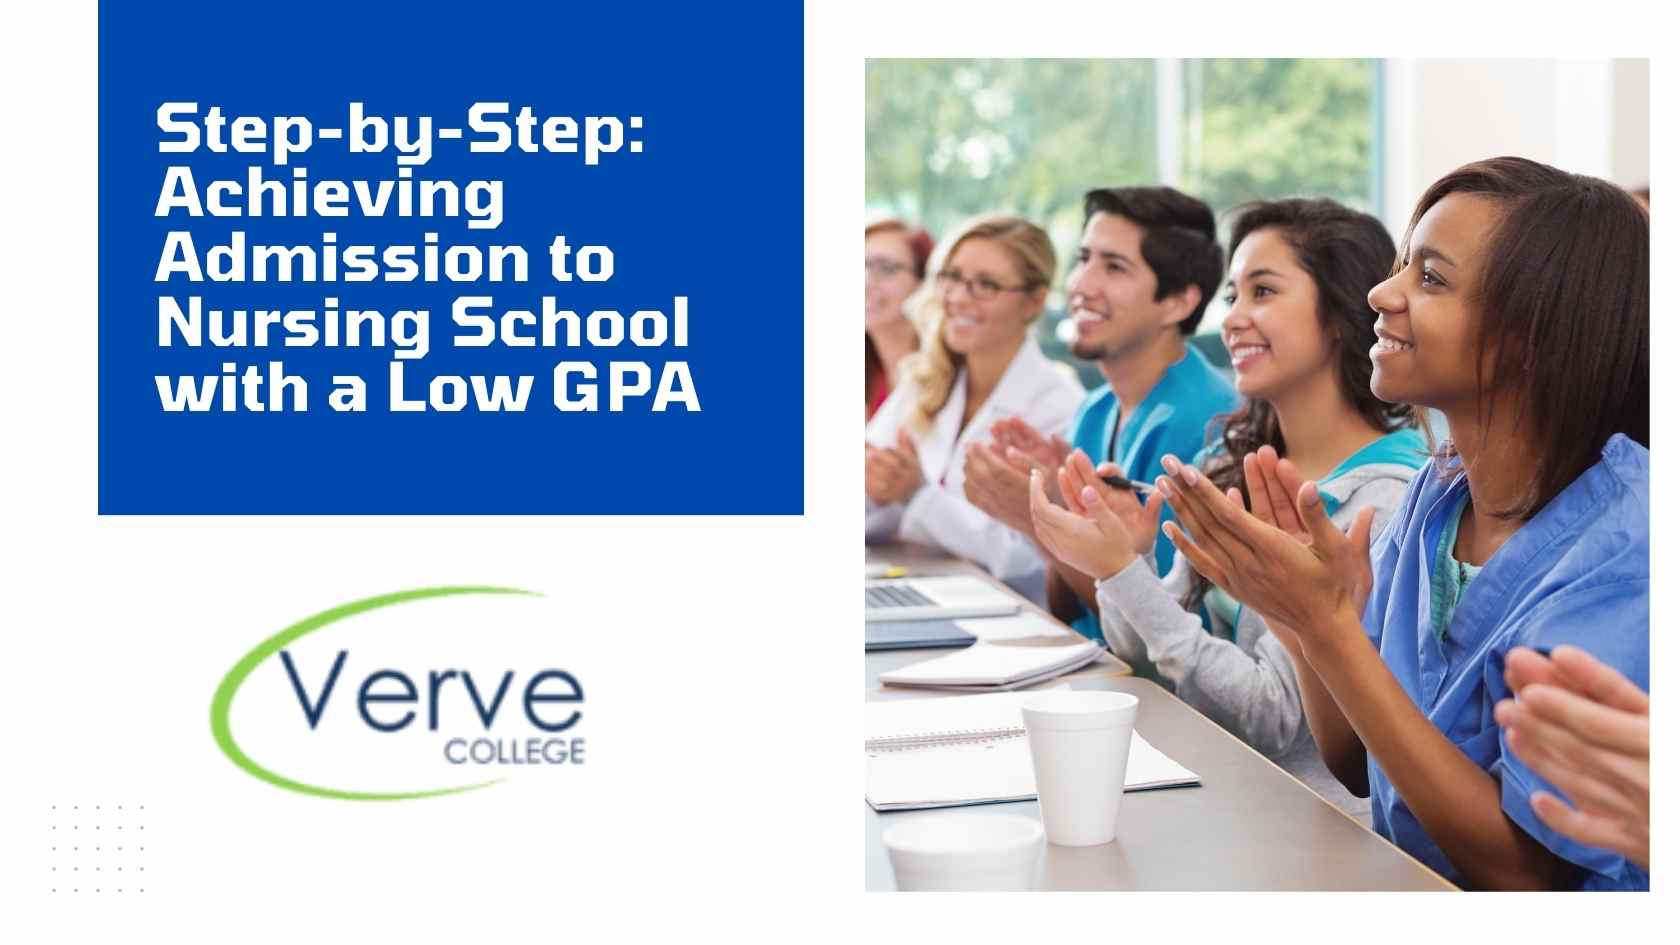 Step-by-Step: Achieving Admission to Nursing School With a Low GPA